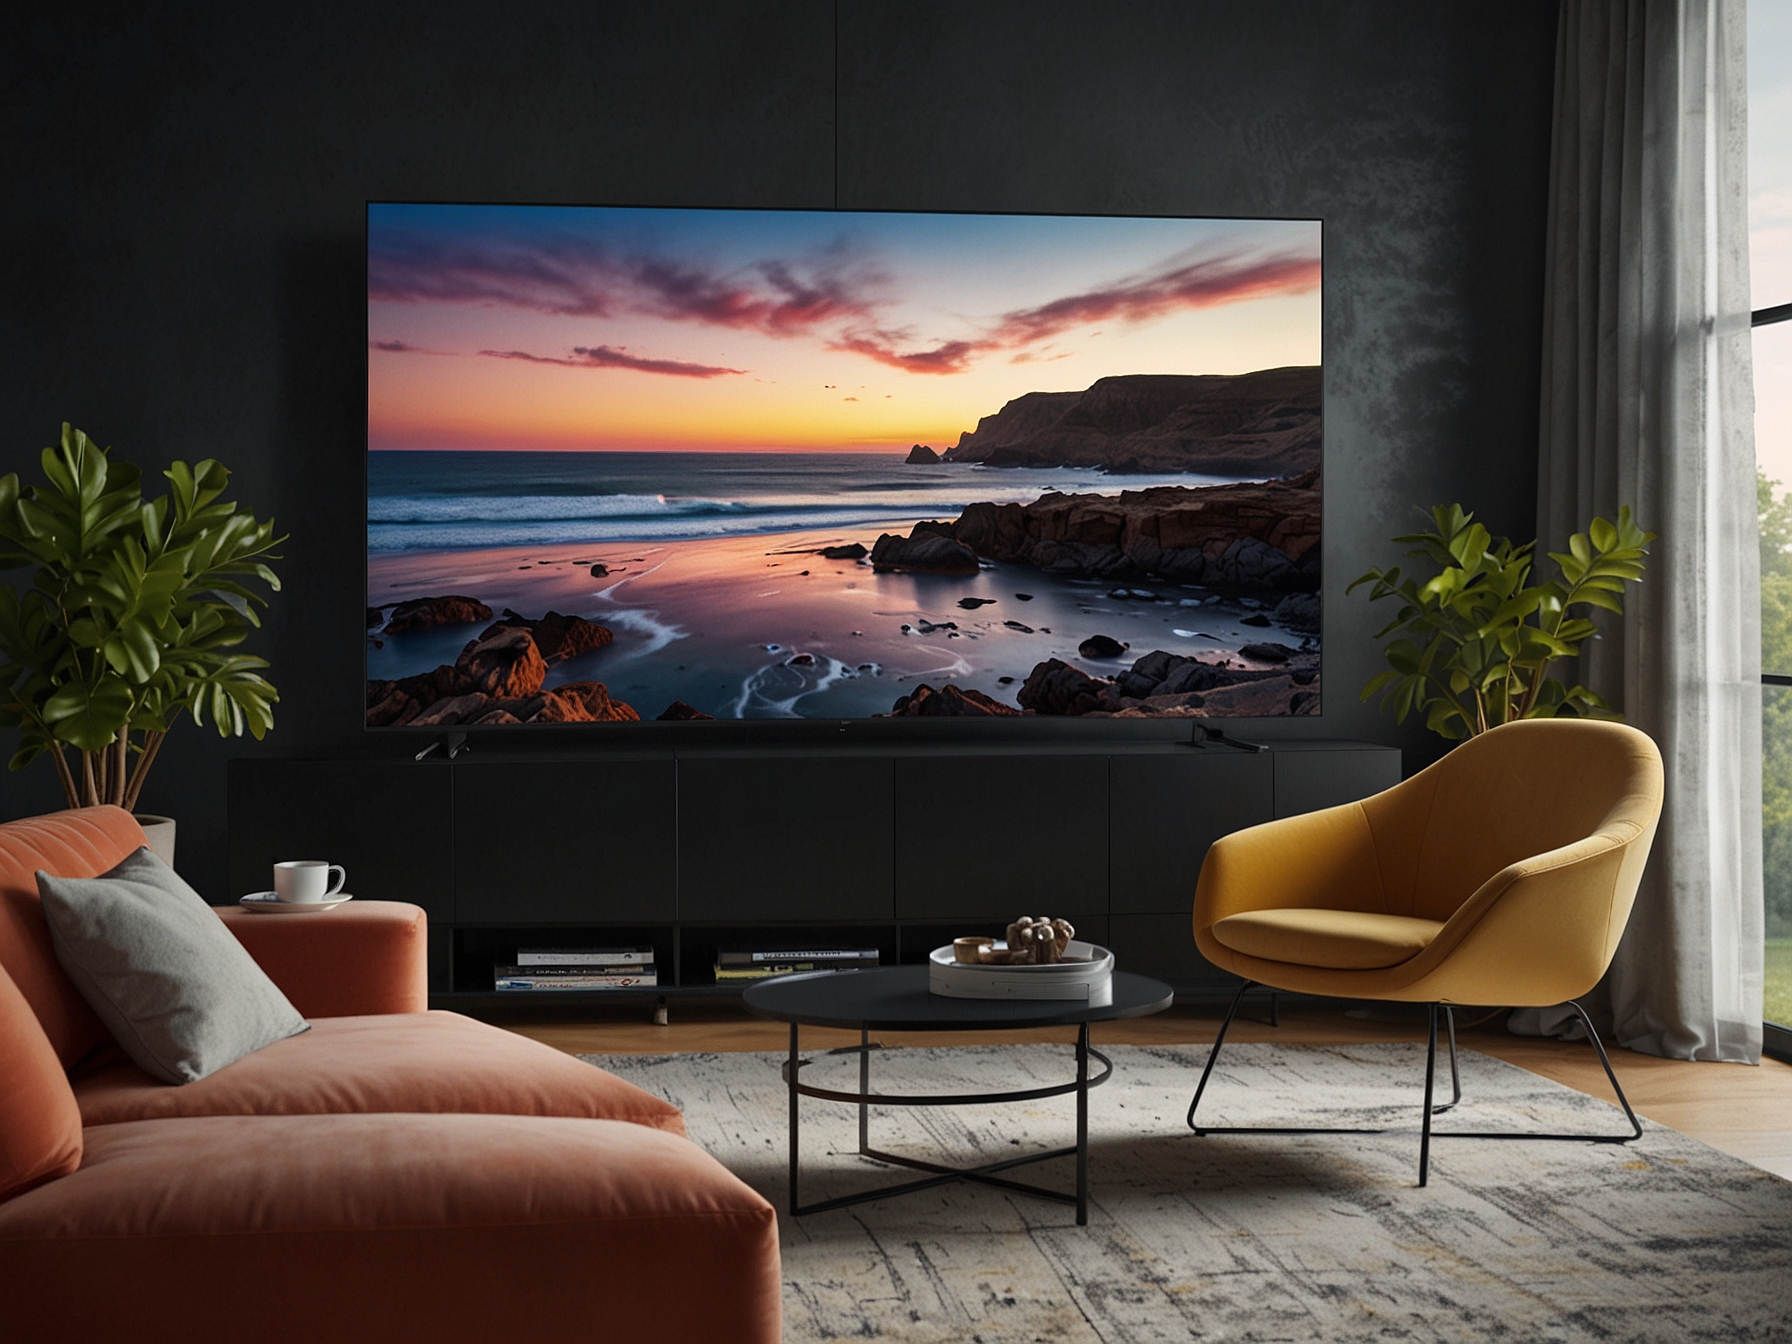 A home entertainment setup featuring a sleek, wall-mounted Samsung 75-inch Class QLED Q80T Series TV. The screen displays a vivid, colorful scene, illustrating the superior picture quality of discounted 4K TVs.